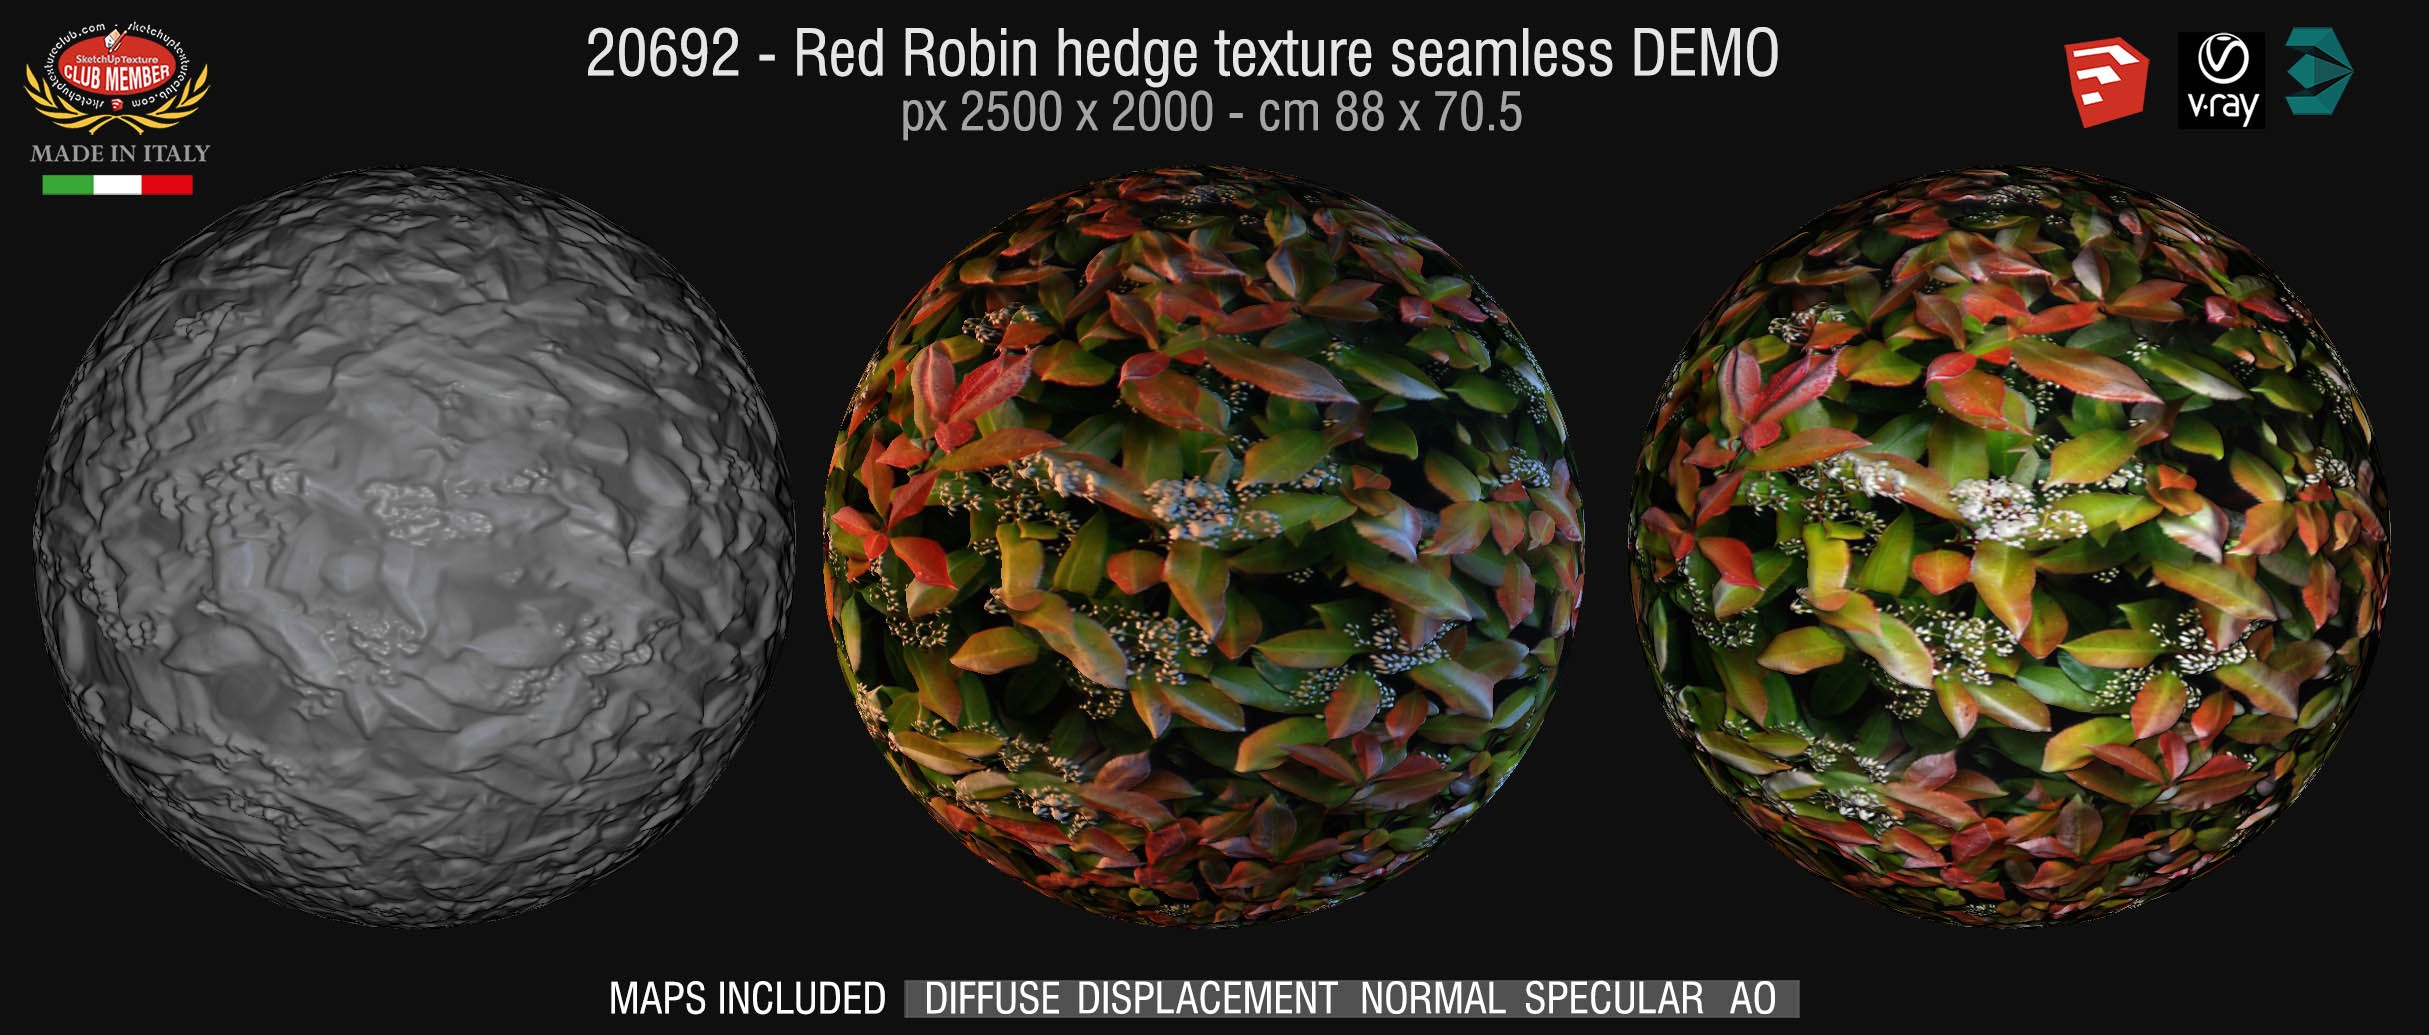 20692 Red robin hedge texture DEMO